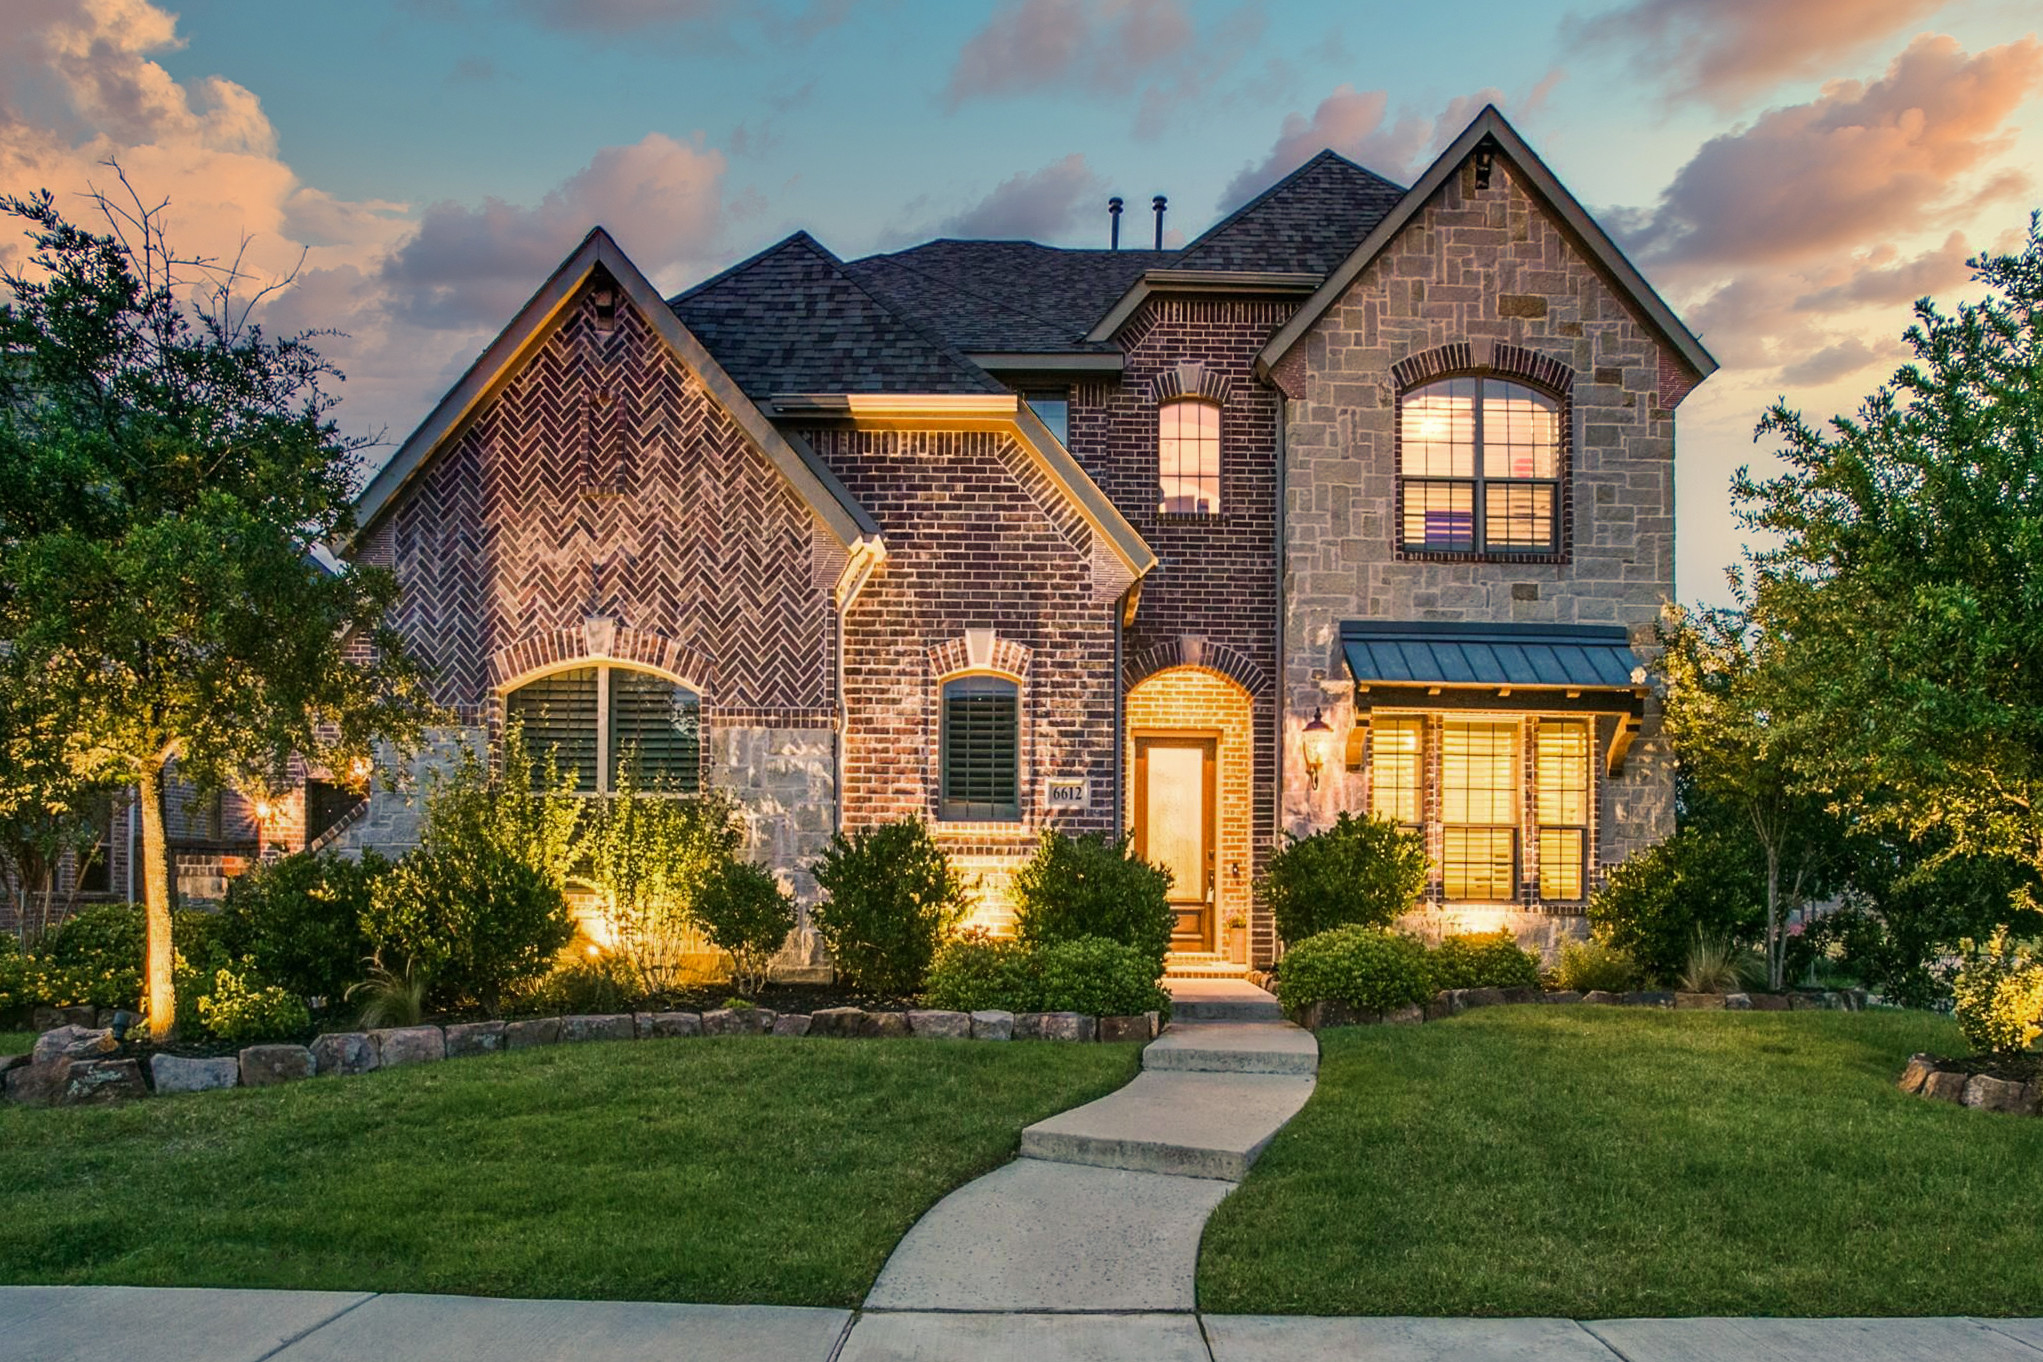 A two-story home for sale in Frisco, Texas